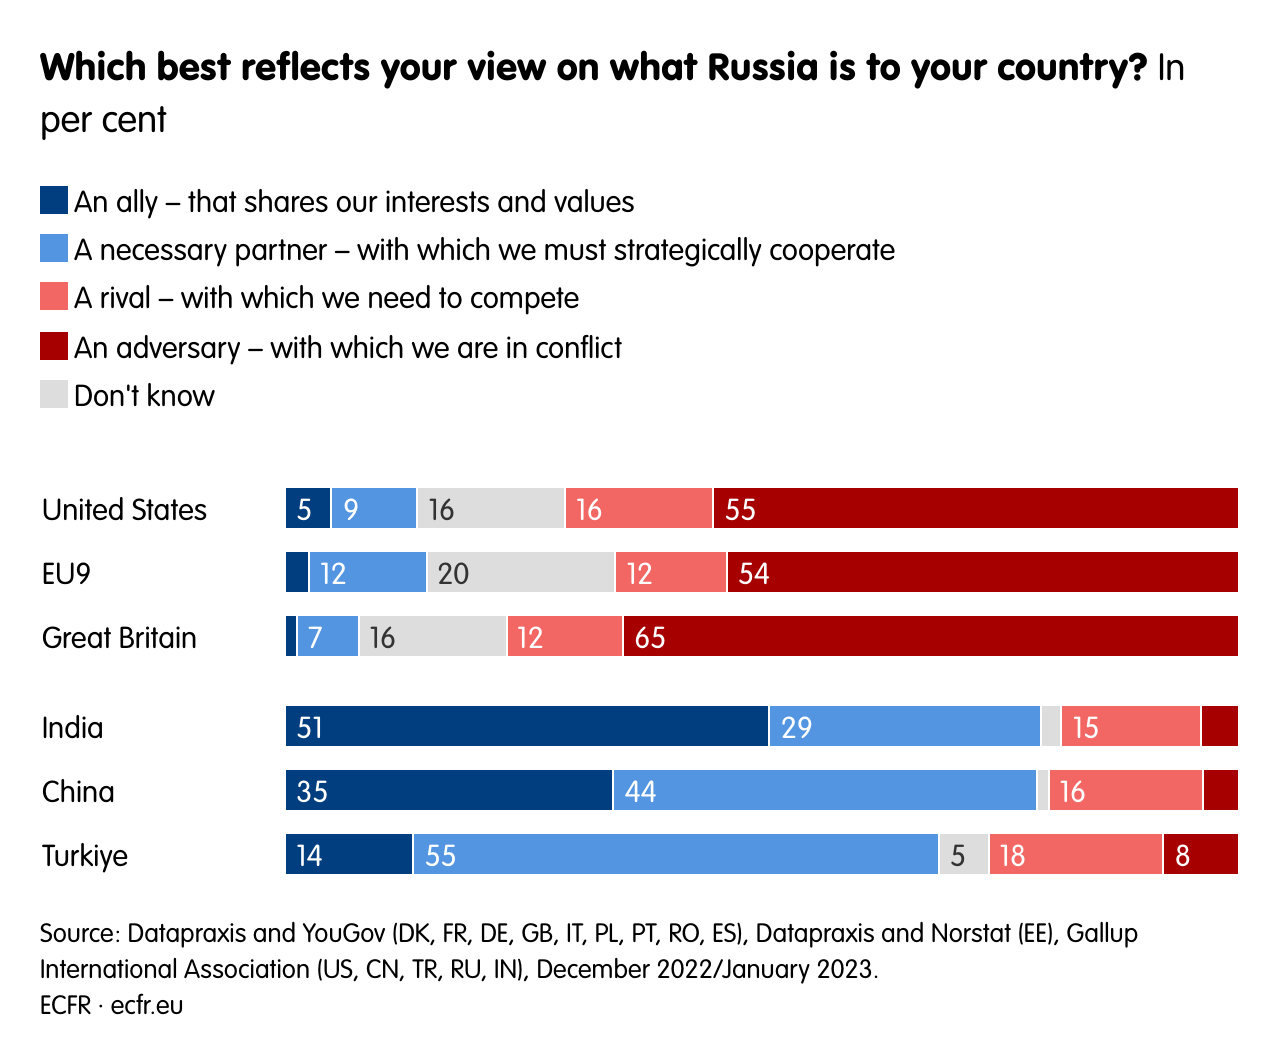 Which best reflects your view on what Russia is to your country?